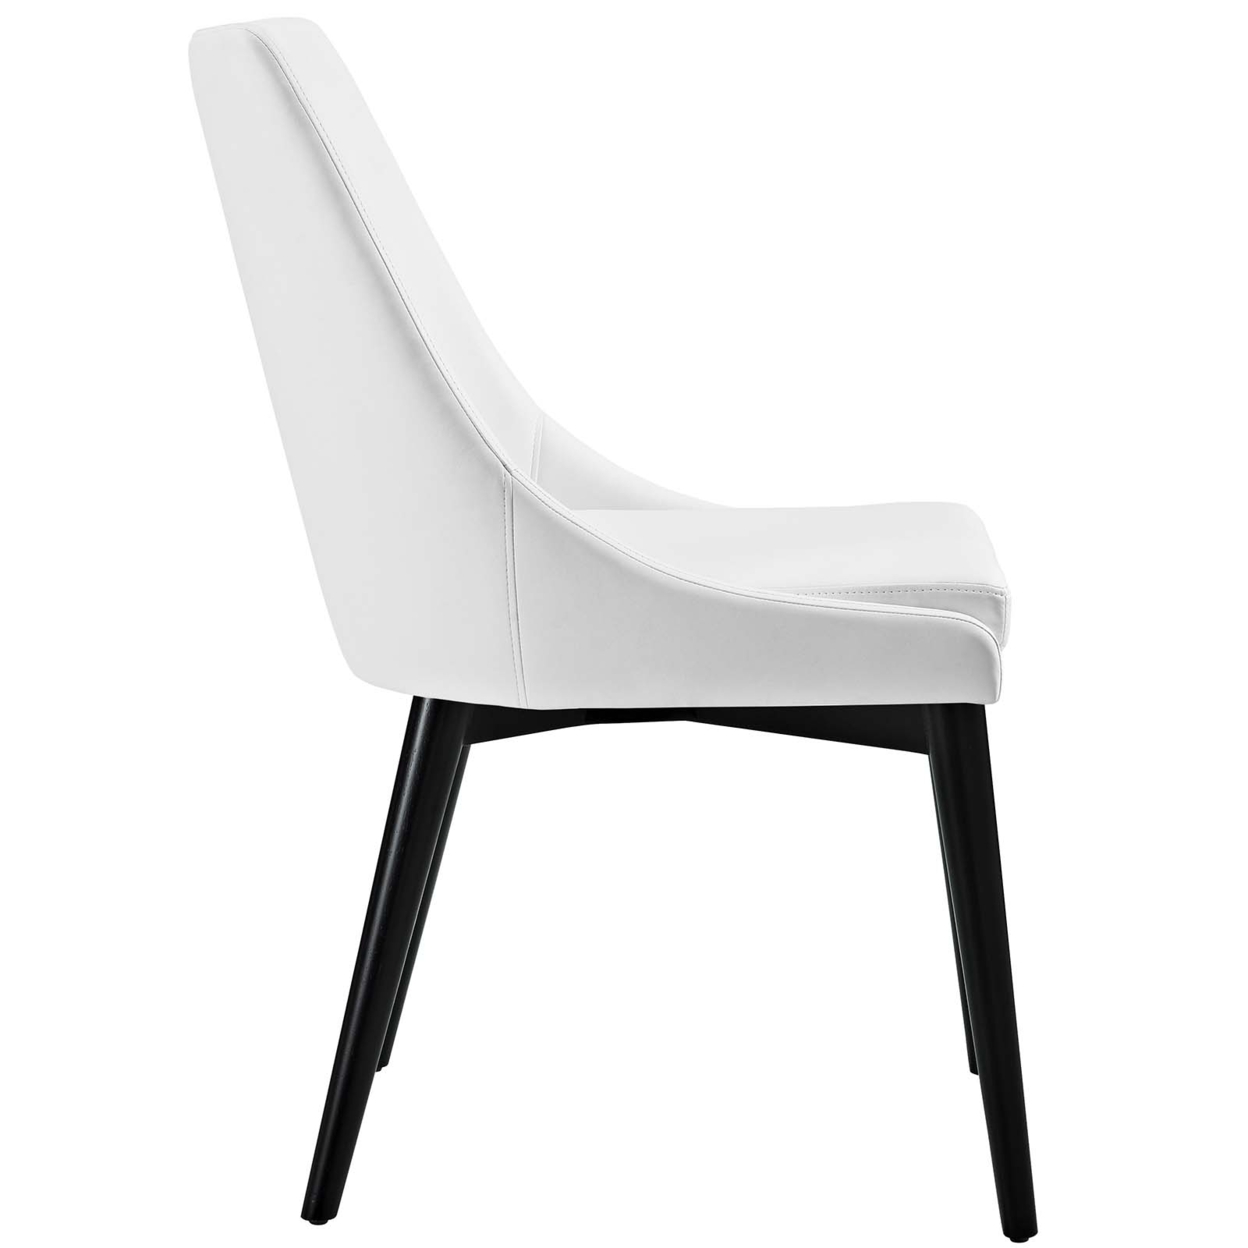 Viscount Set Of 2 Vinyl Dining Side Chair, White